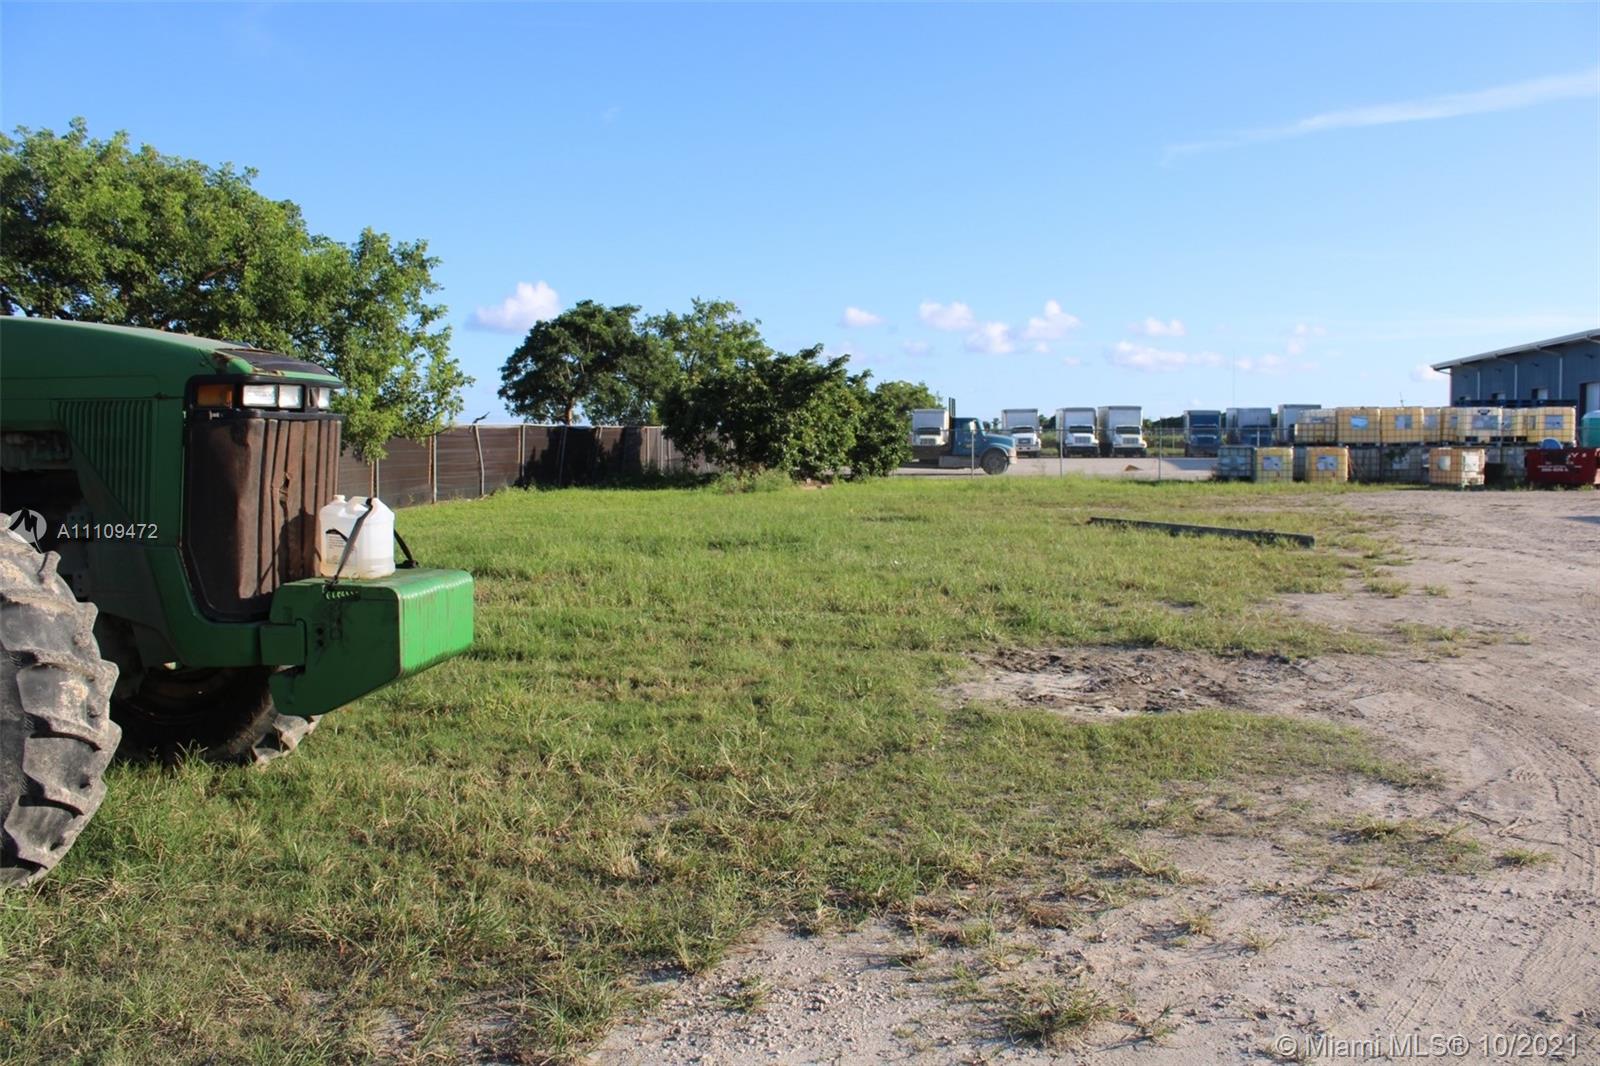 160th ST, Miami, Florida 33187, ,Land,For Sale, 160th ST,A11109472